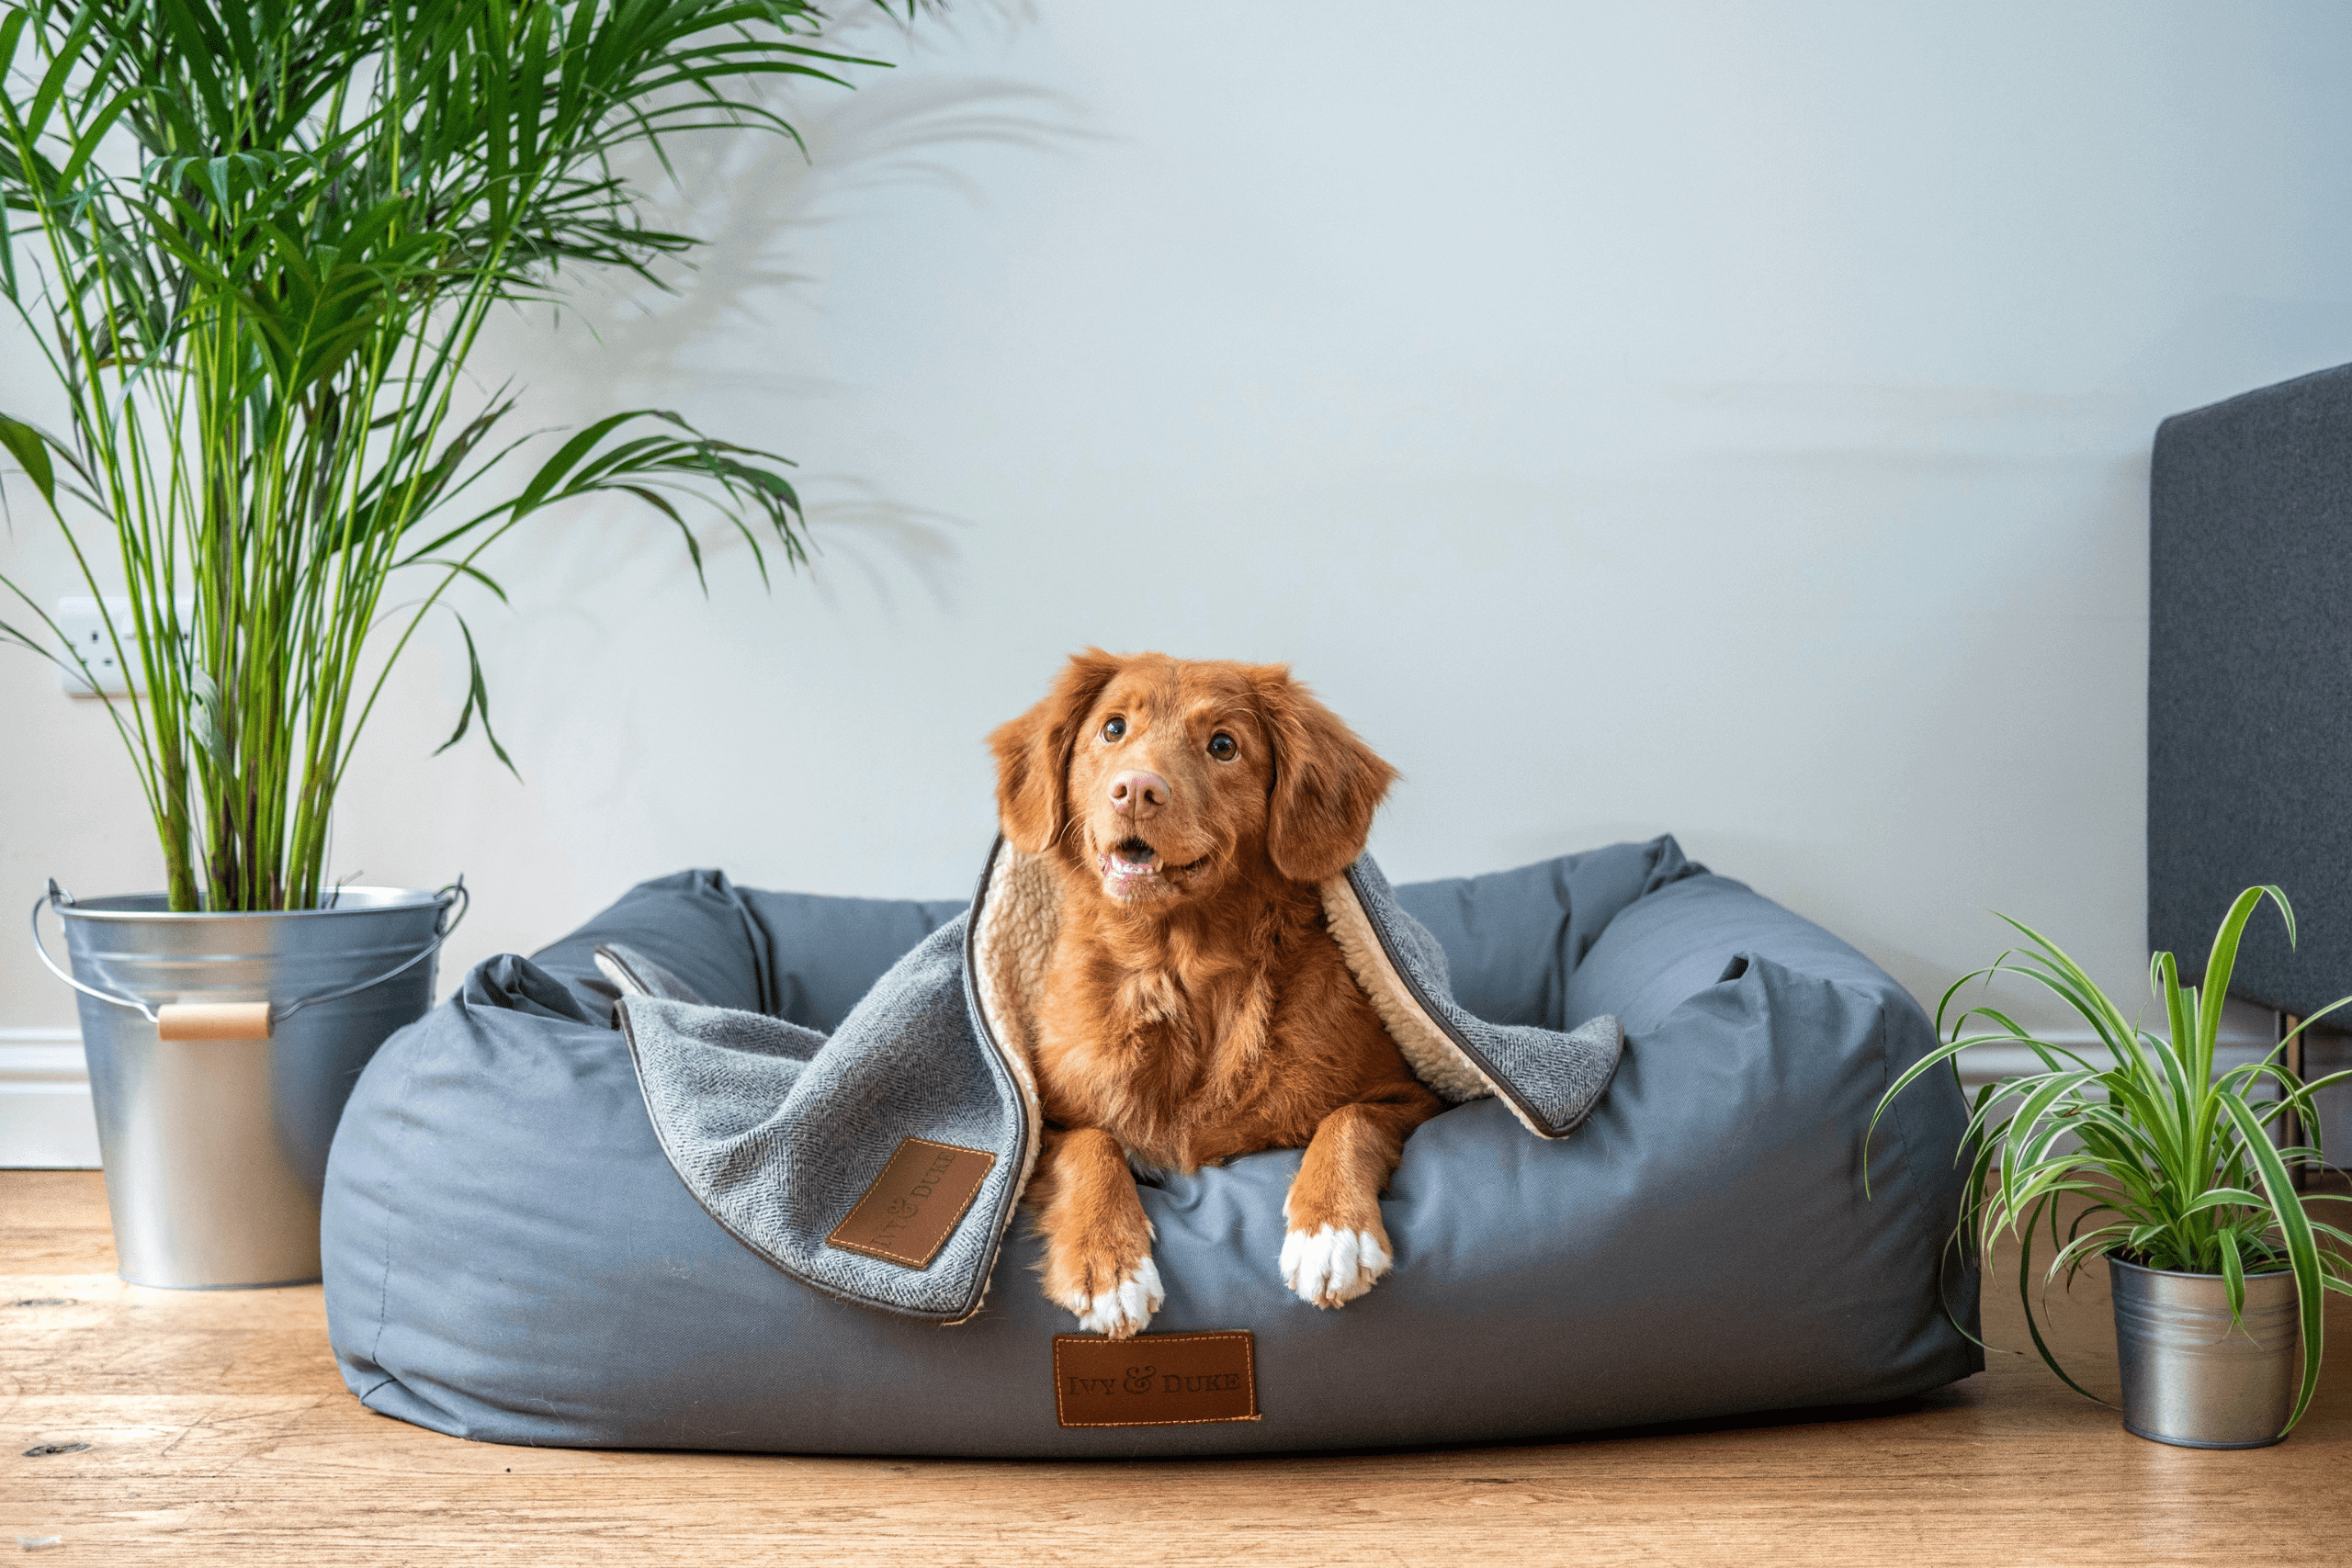 Marketing for Pet Brands: How to reach the right audience